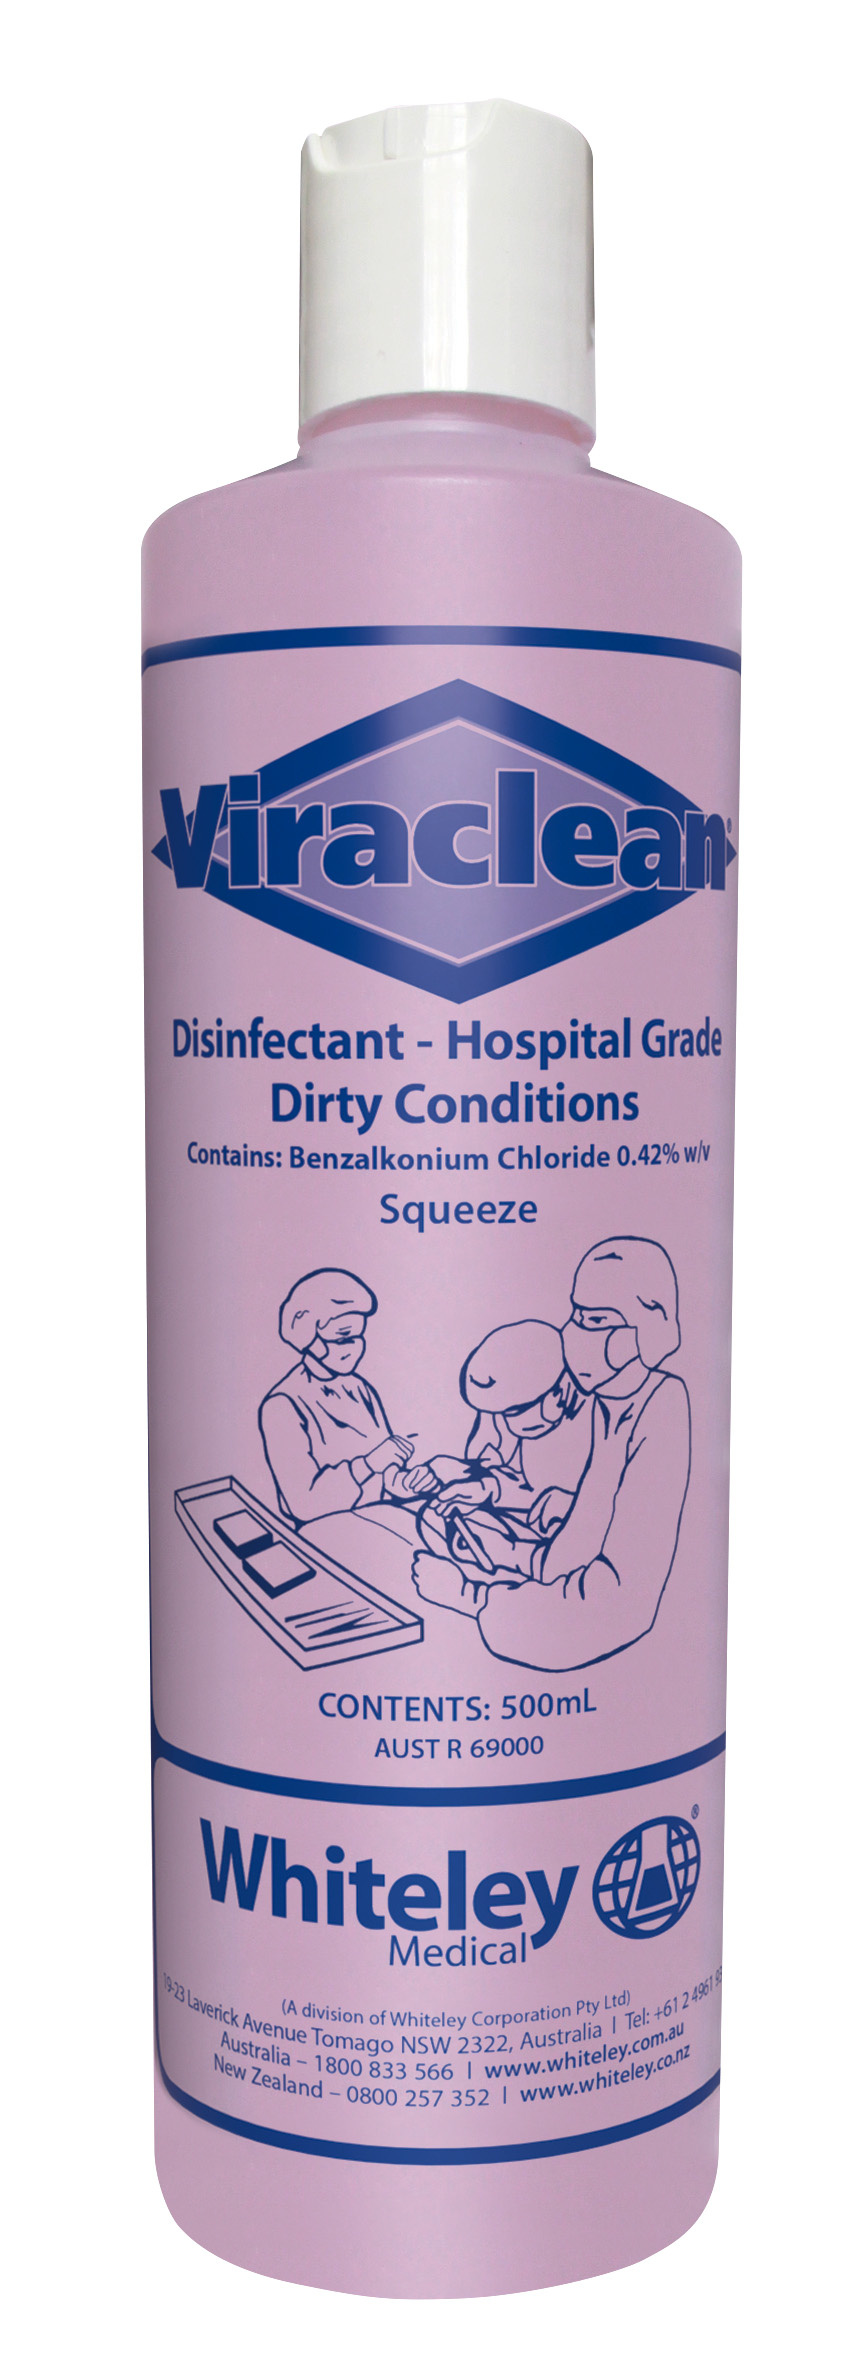 Whiteley Viraclean Hospital Grade Disinfectant 500ml Squeeze container